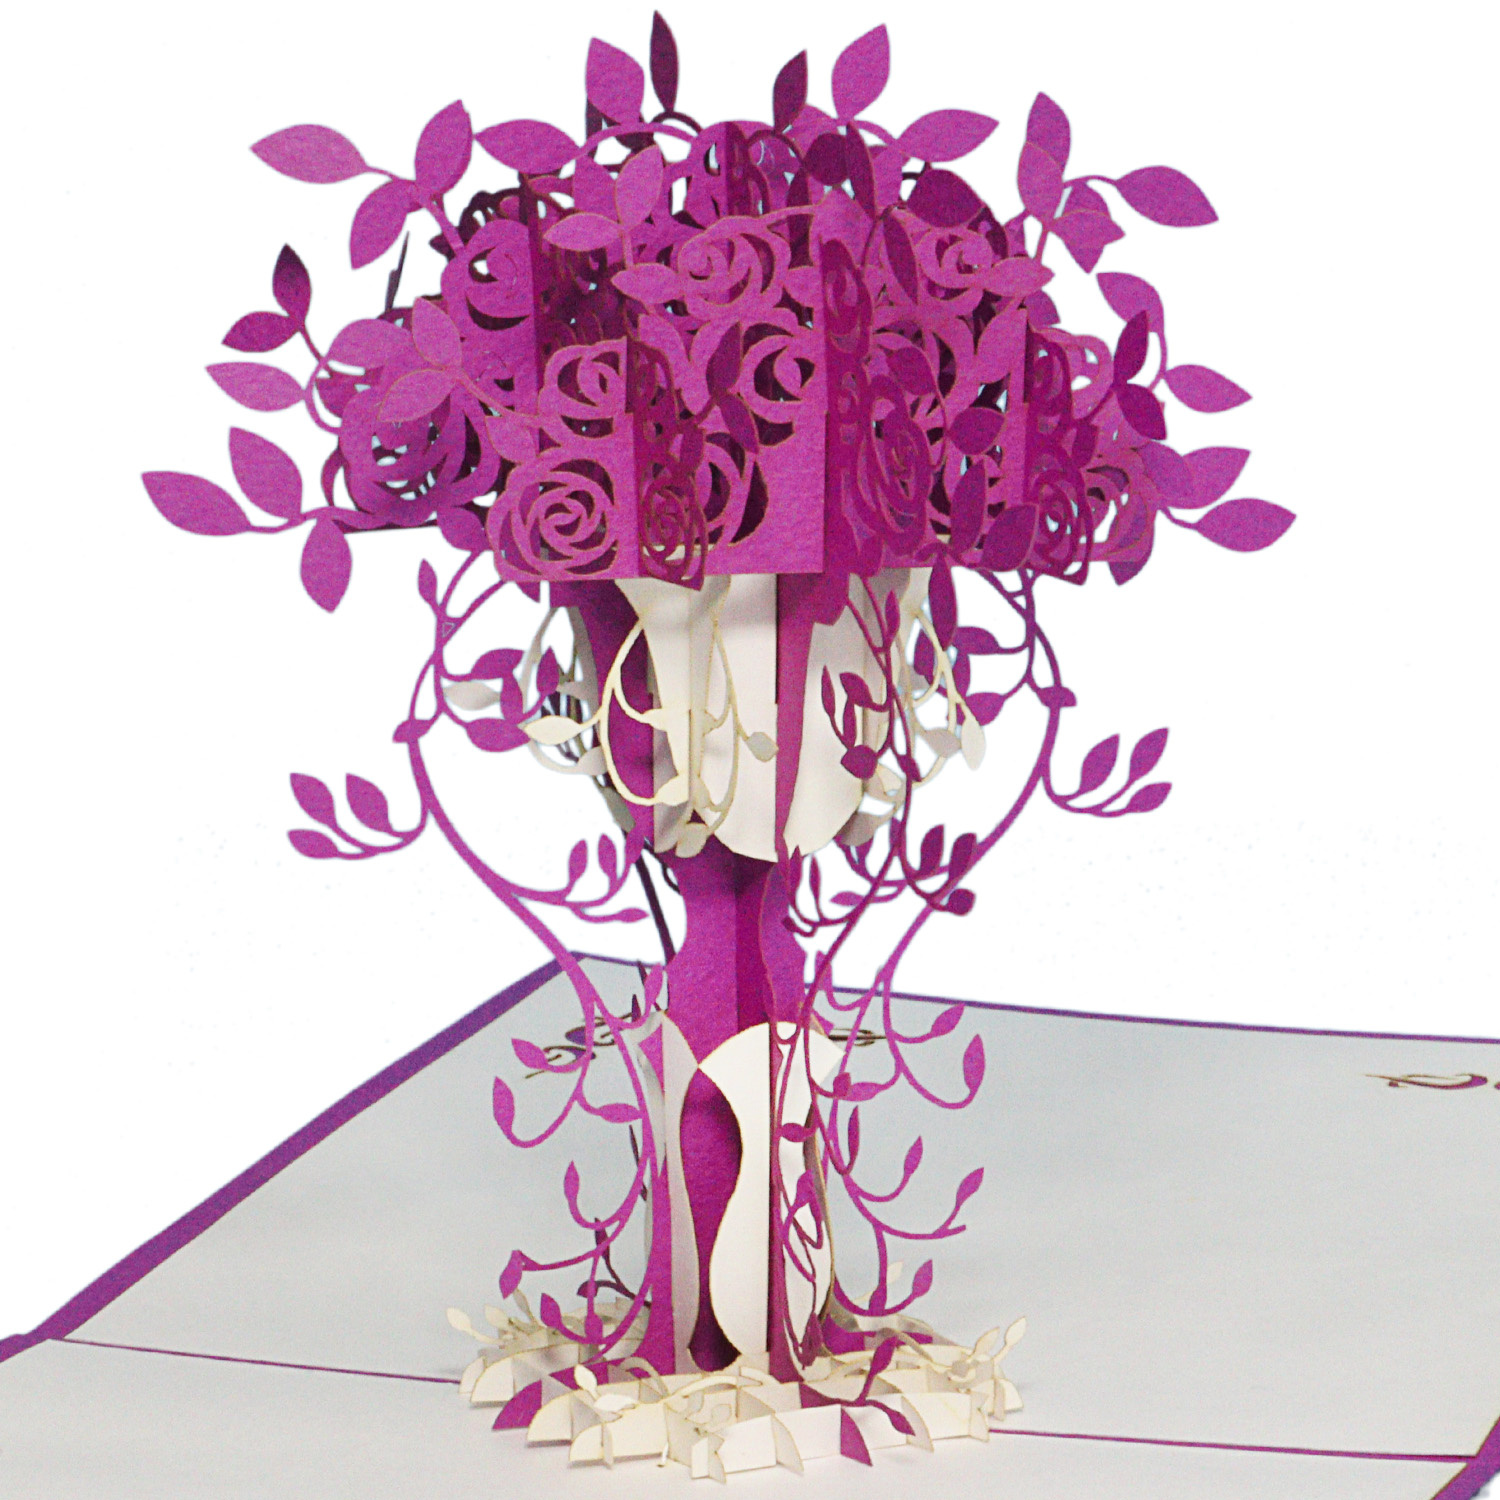 LINPOPUP Pop Up 3D Card, Birthday Card, Greeting Card Mother's Day, Purple Flowers, LINPopUp®, N229